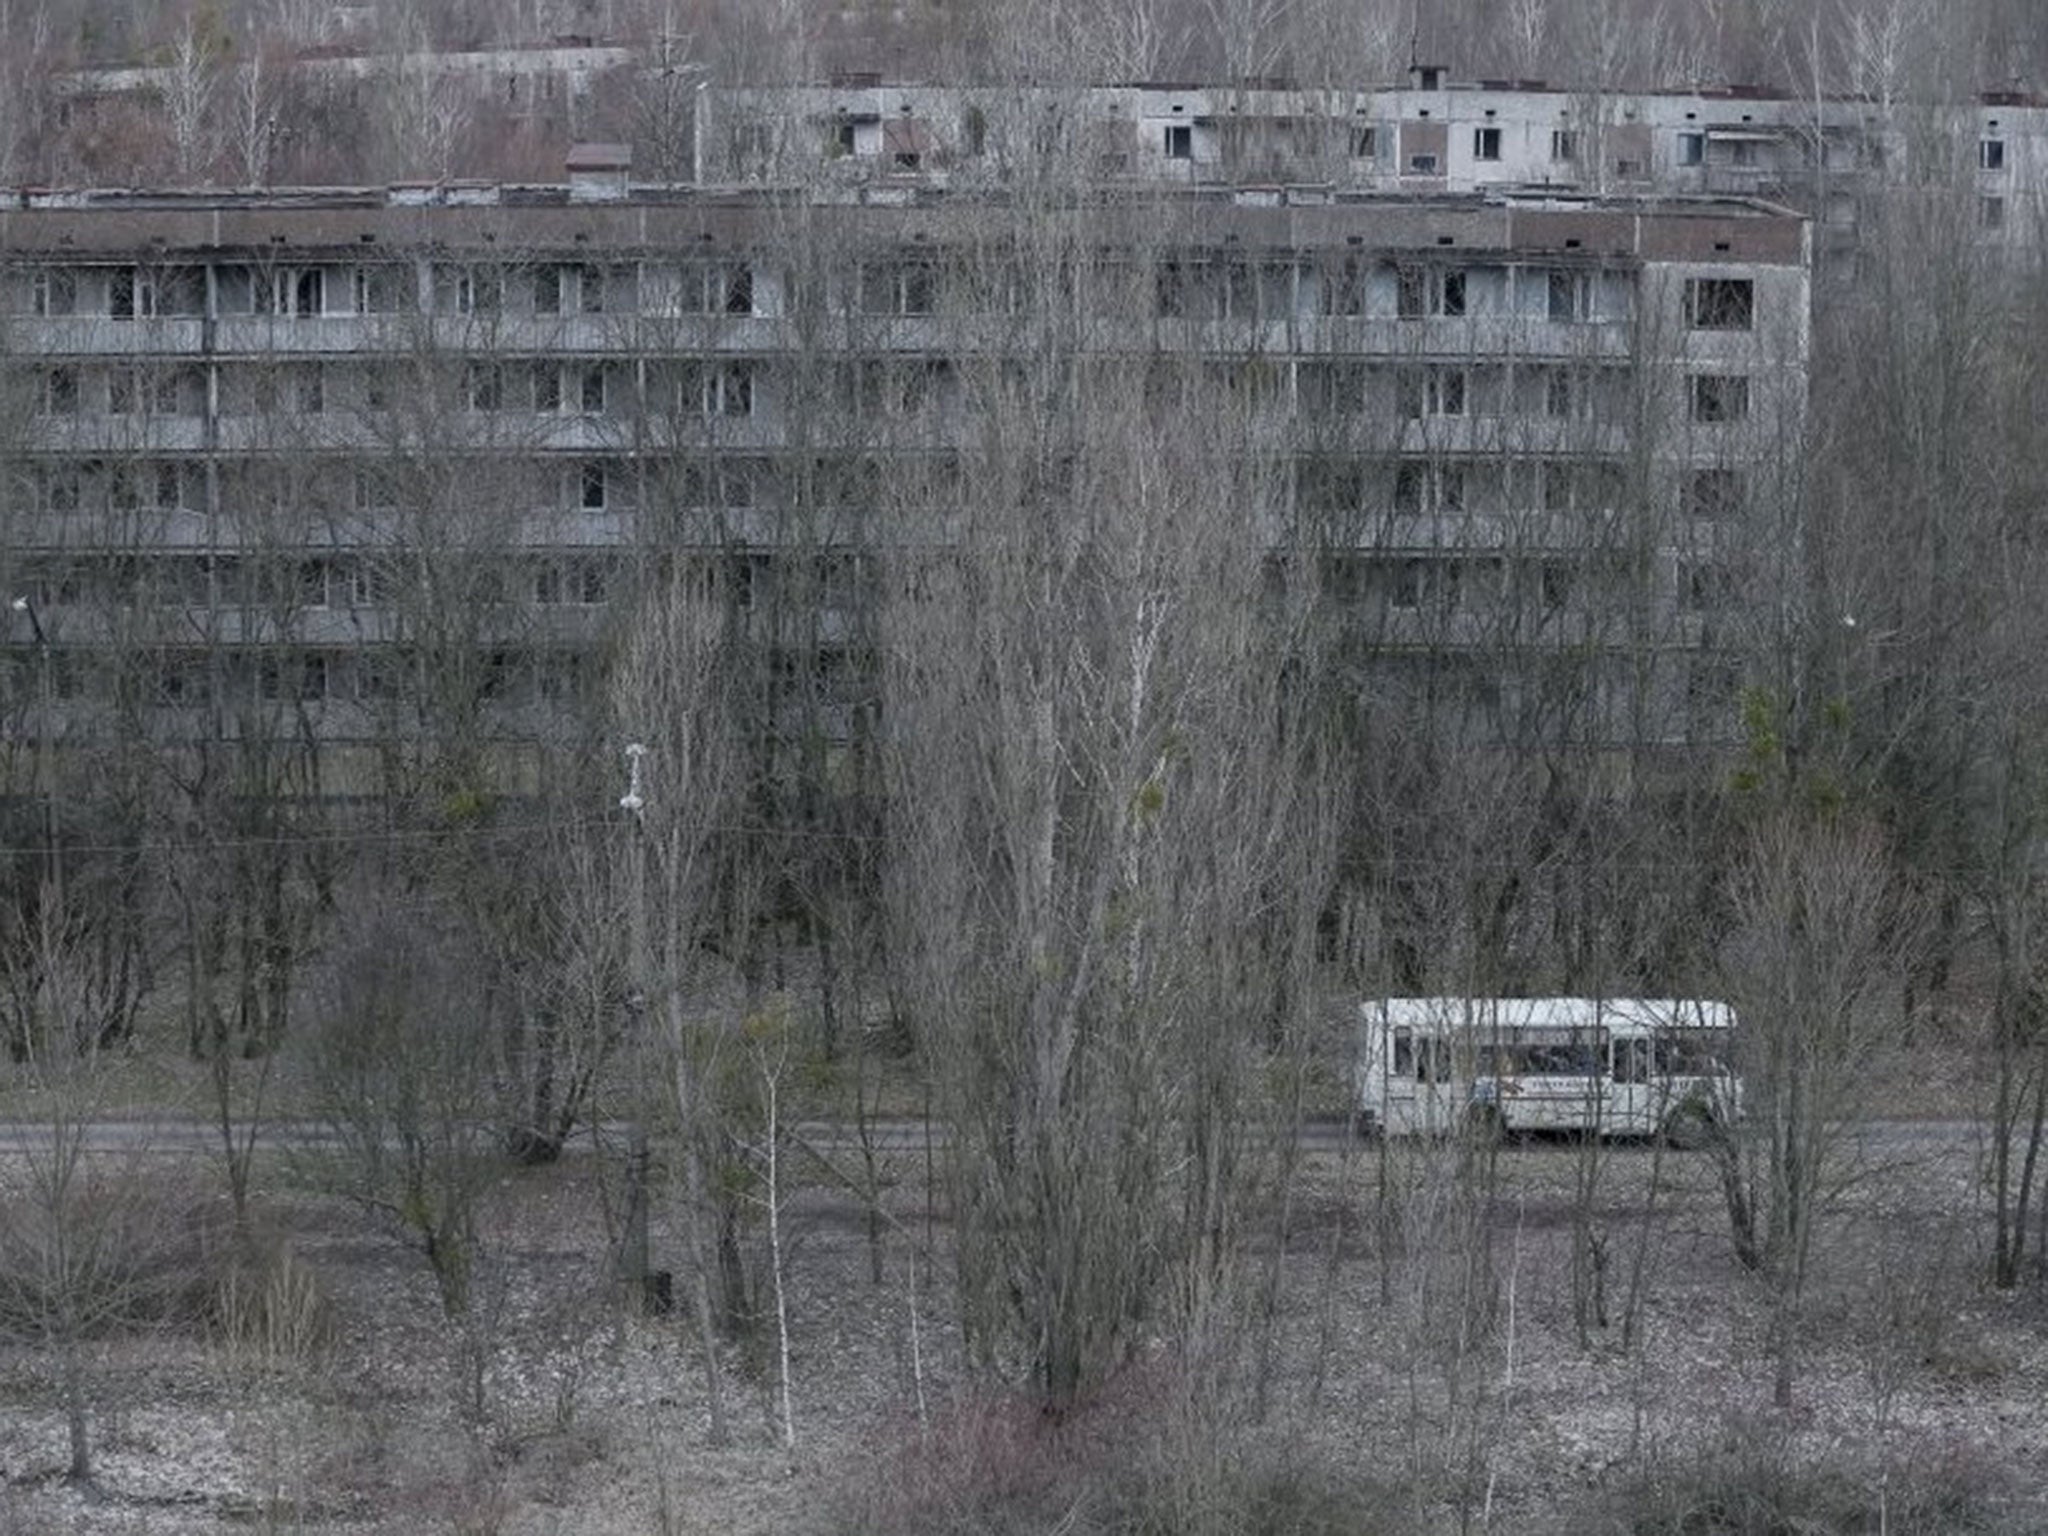 Employees ride a bus in the abandoned city of Pripyat